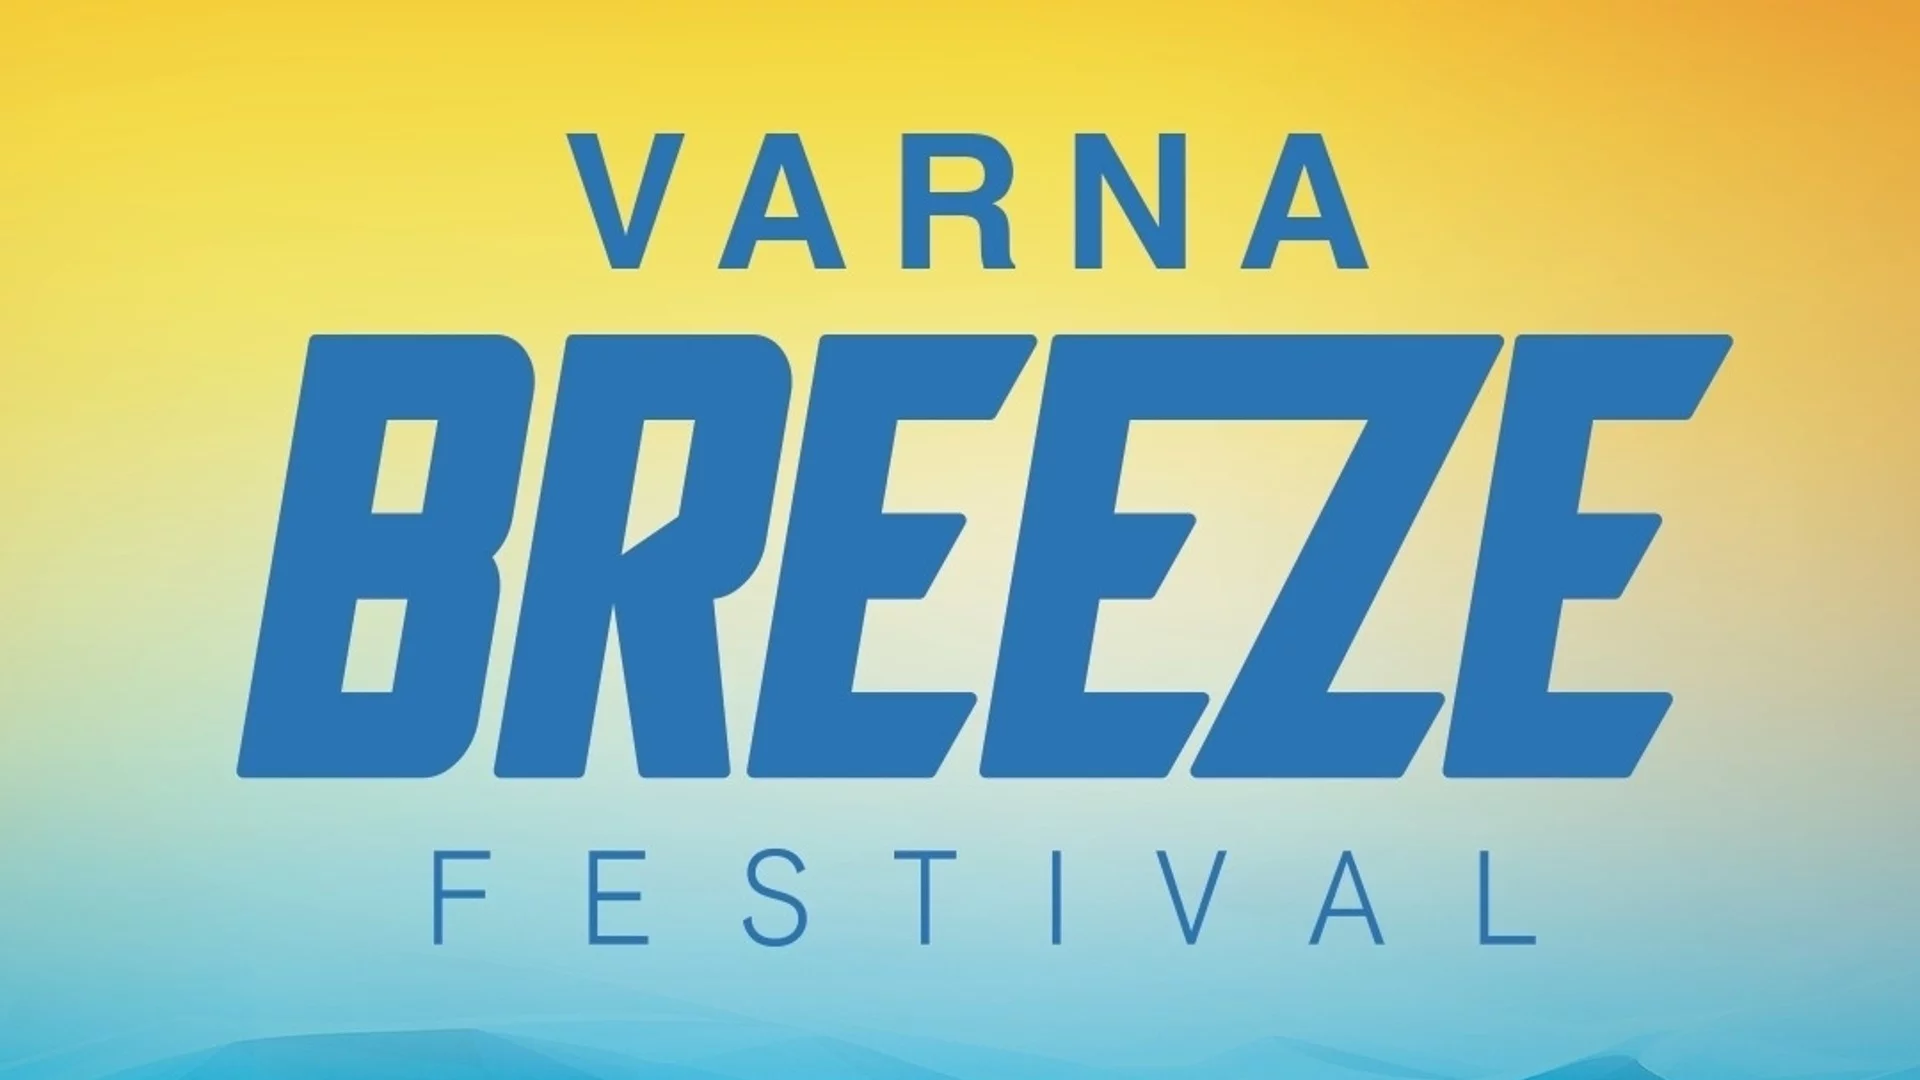 Varna Breeze by Exit от 14 до 18 август: Stereo MC’s, Gipsy Kings, Chambao и много други